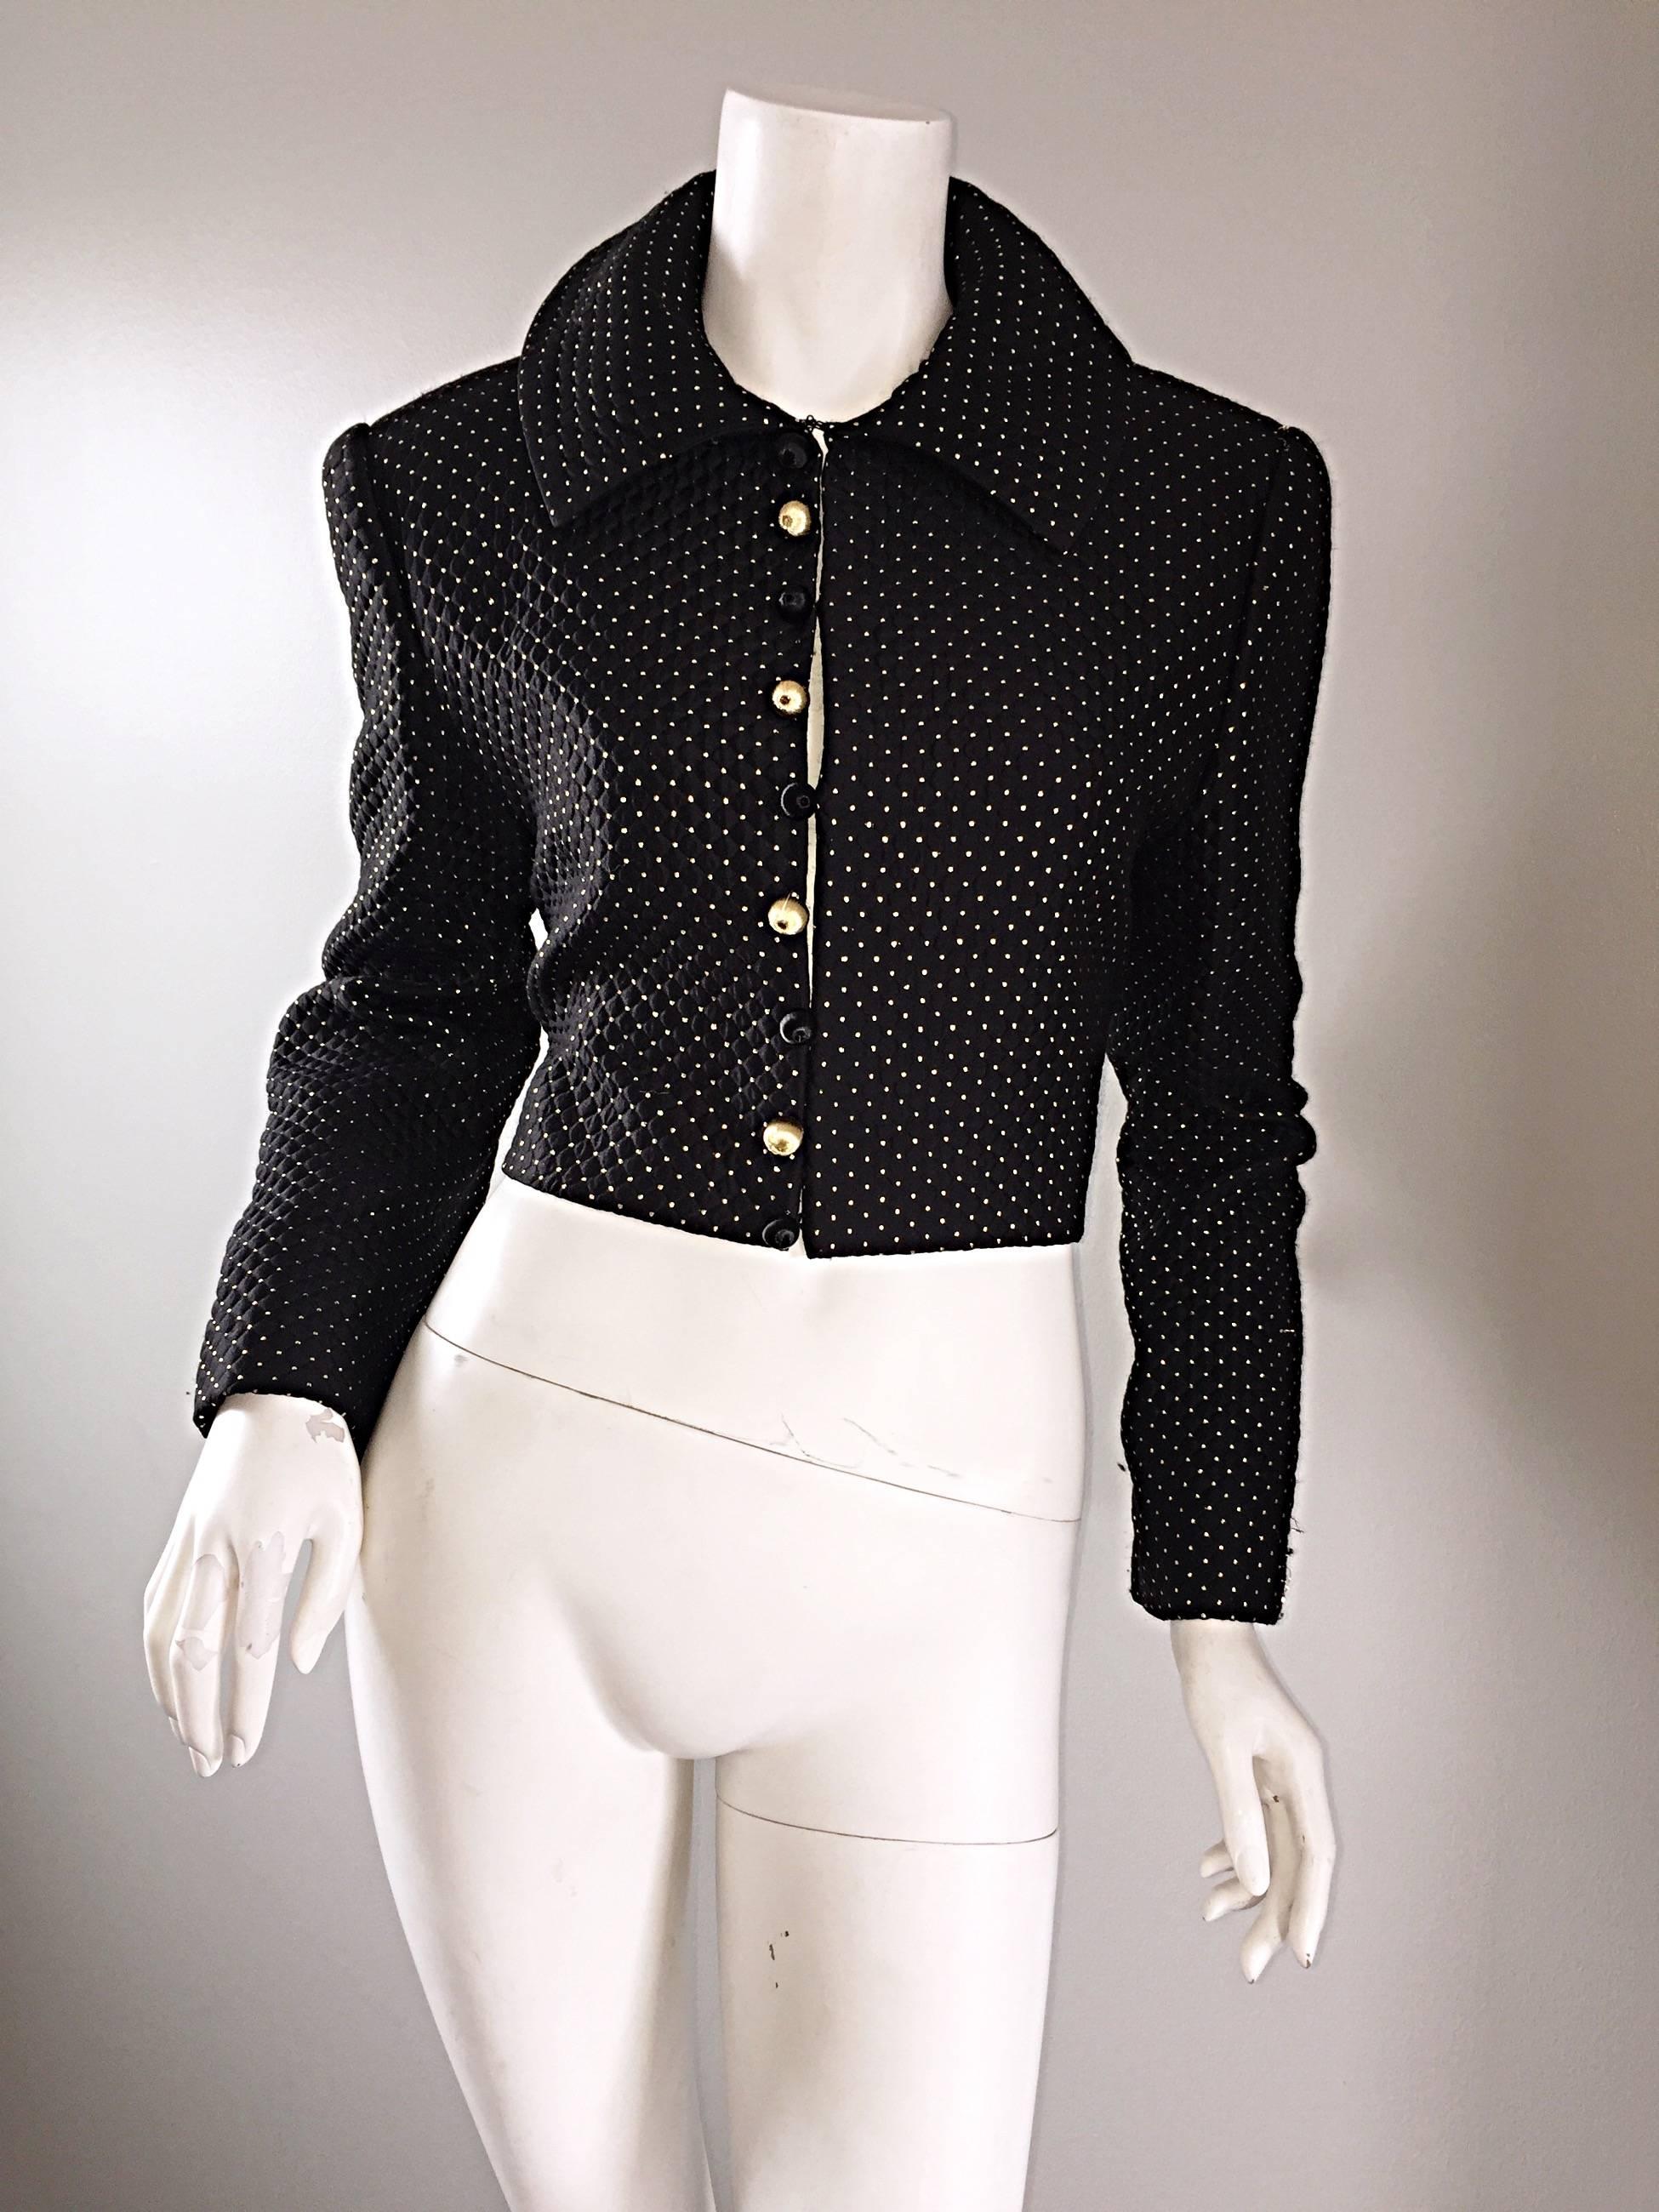 Beautiful Vintage 90s CAROLYNE ROEHM for SAKS FIFTH AVENUE black and gold silk cropped bolero jacket! Black silk with gold pin dots sewn throughout. Black and gold 'ball' buttons up the bodice. Chic Peter Pan collar. Fully lined in silk. Can easily